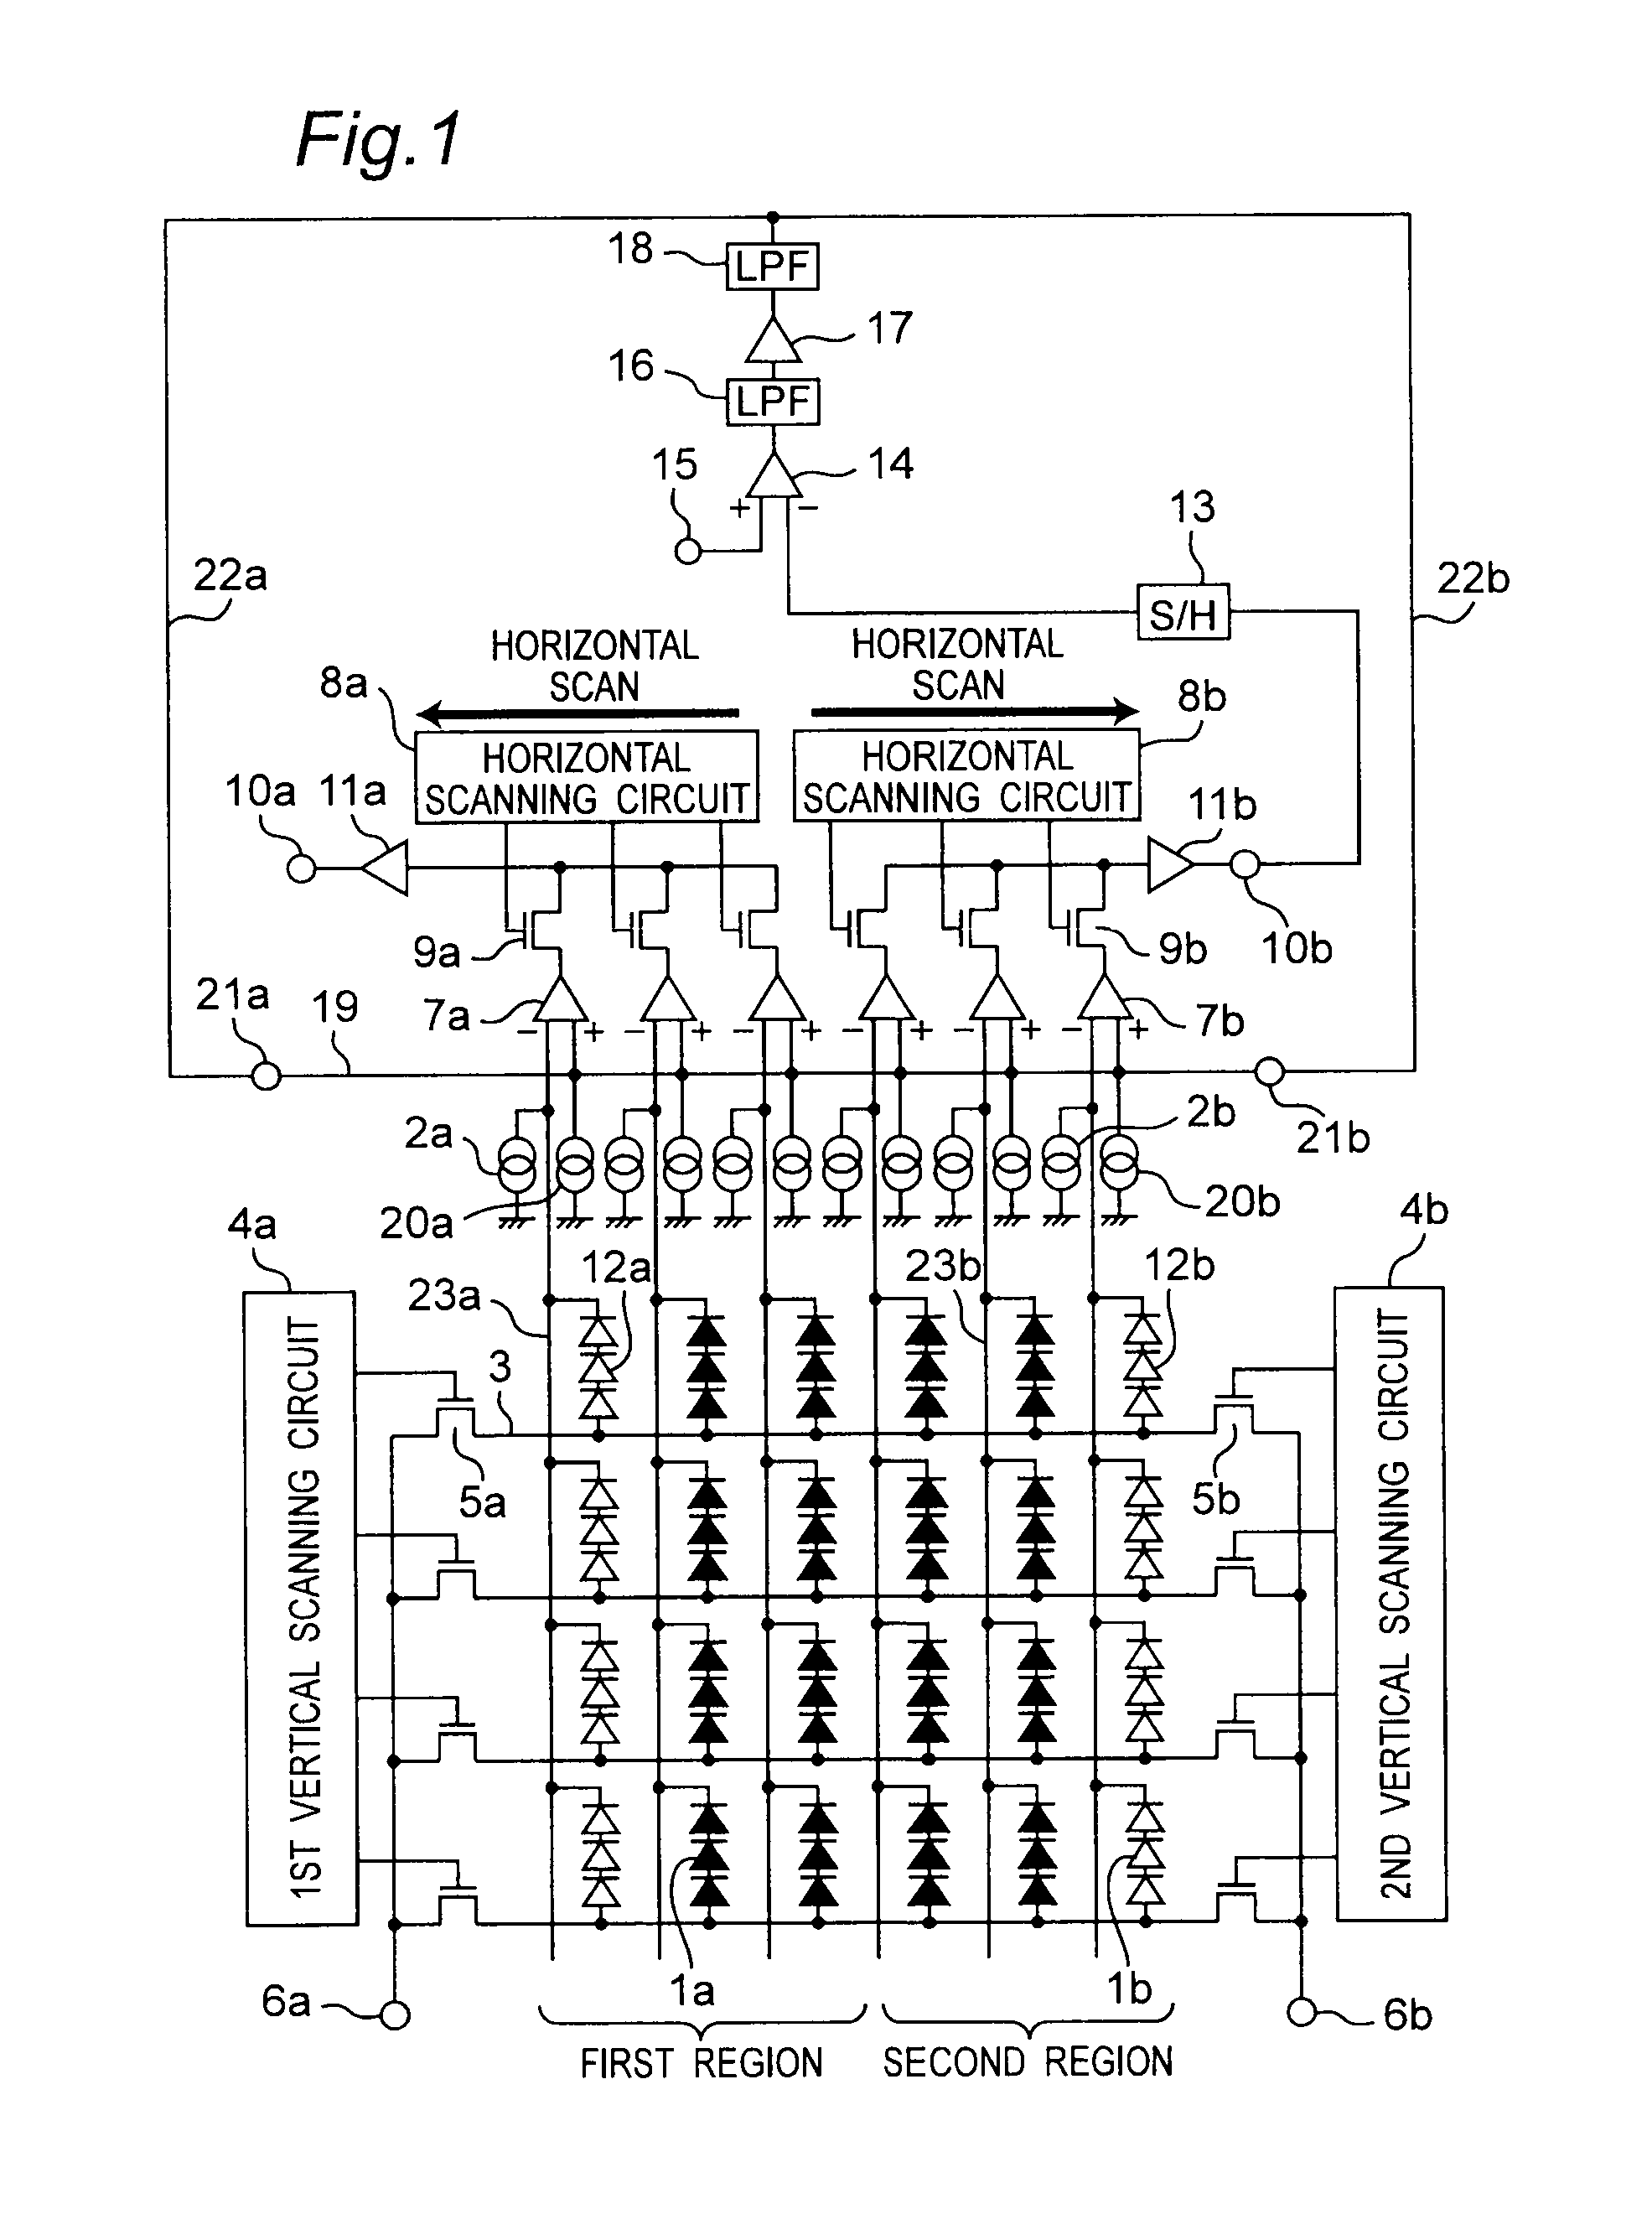 Infrared solid-state imaging device